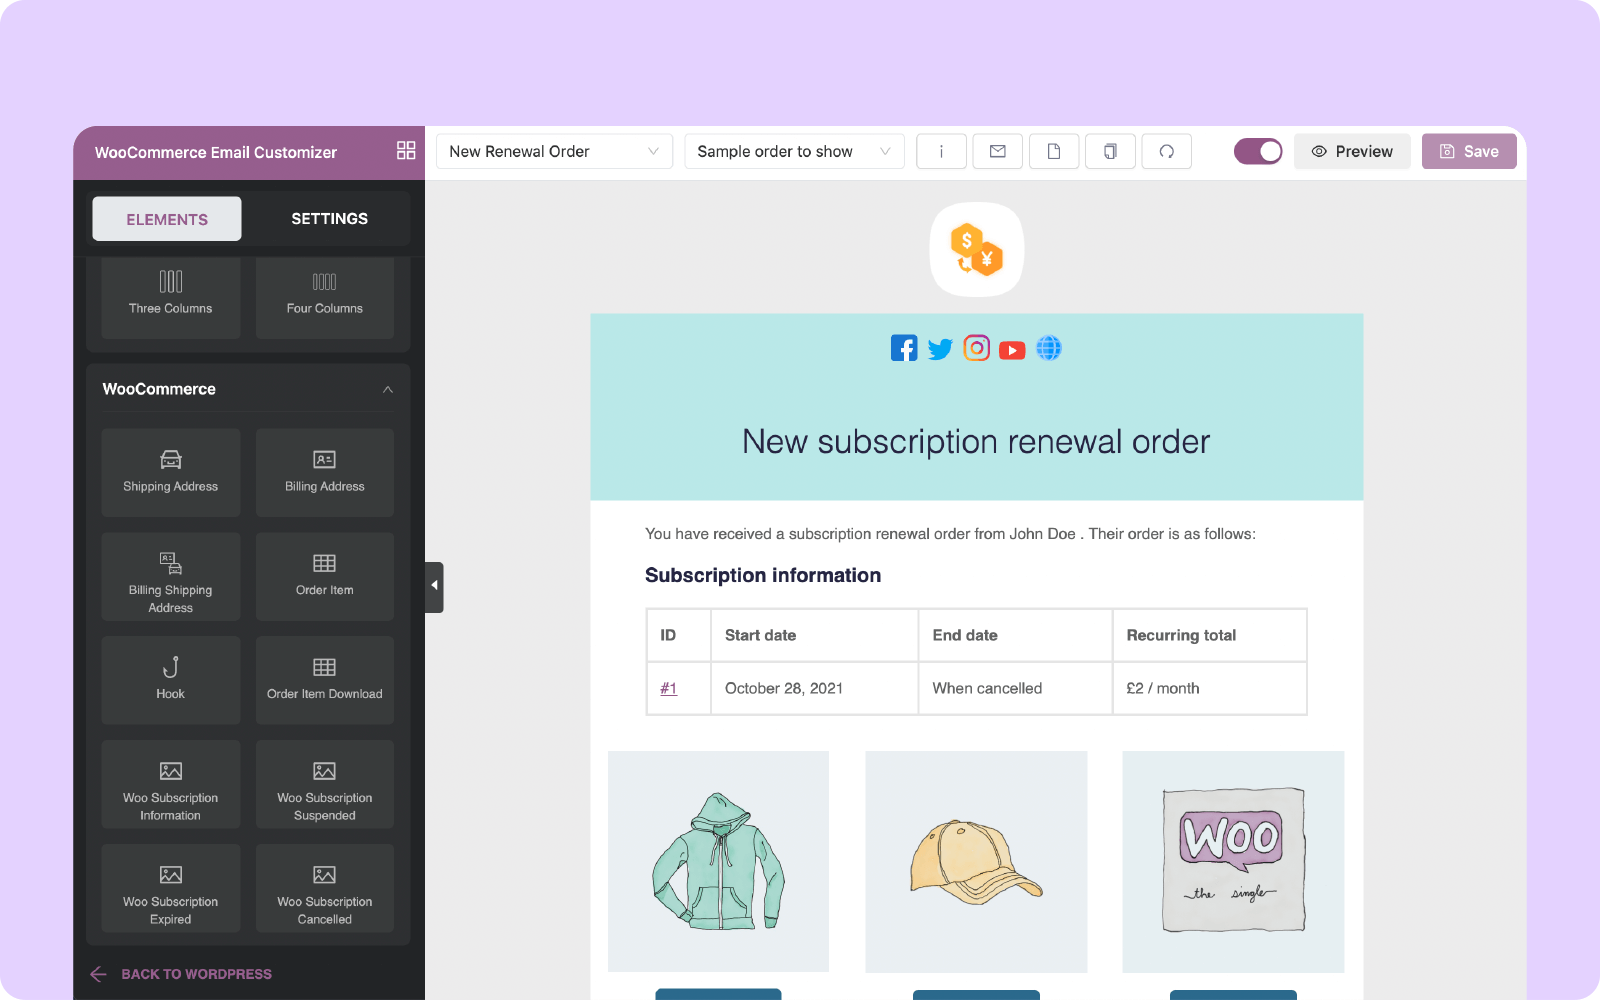 New subscription renewal order email with WooCommerce store branding details